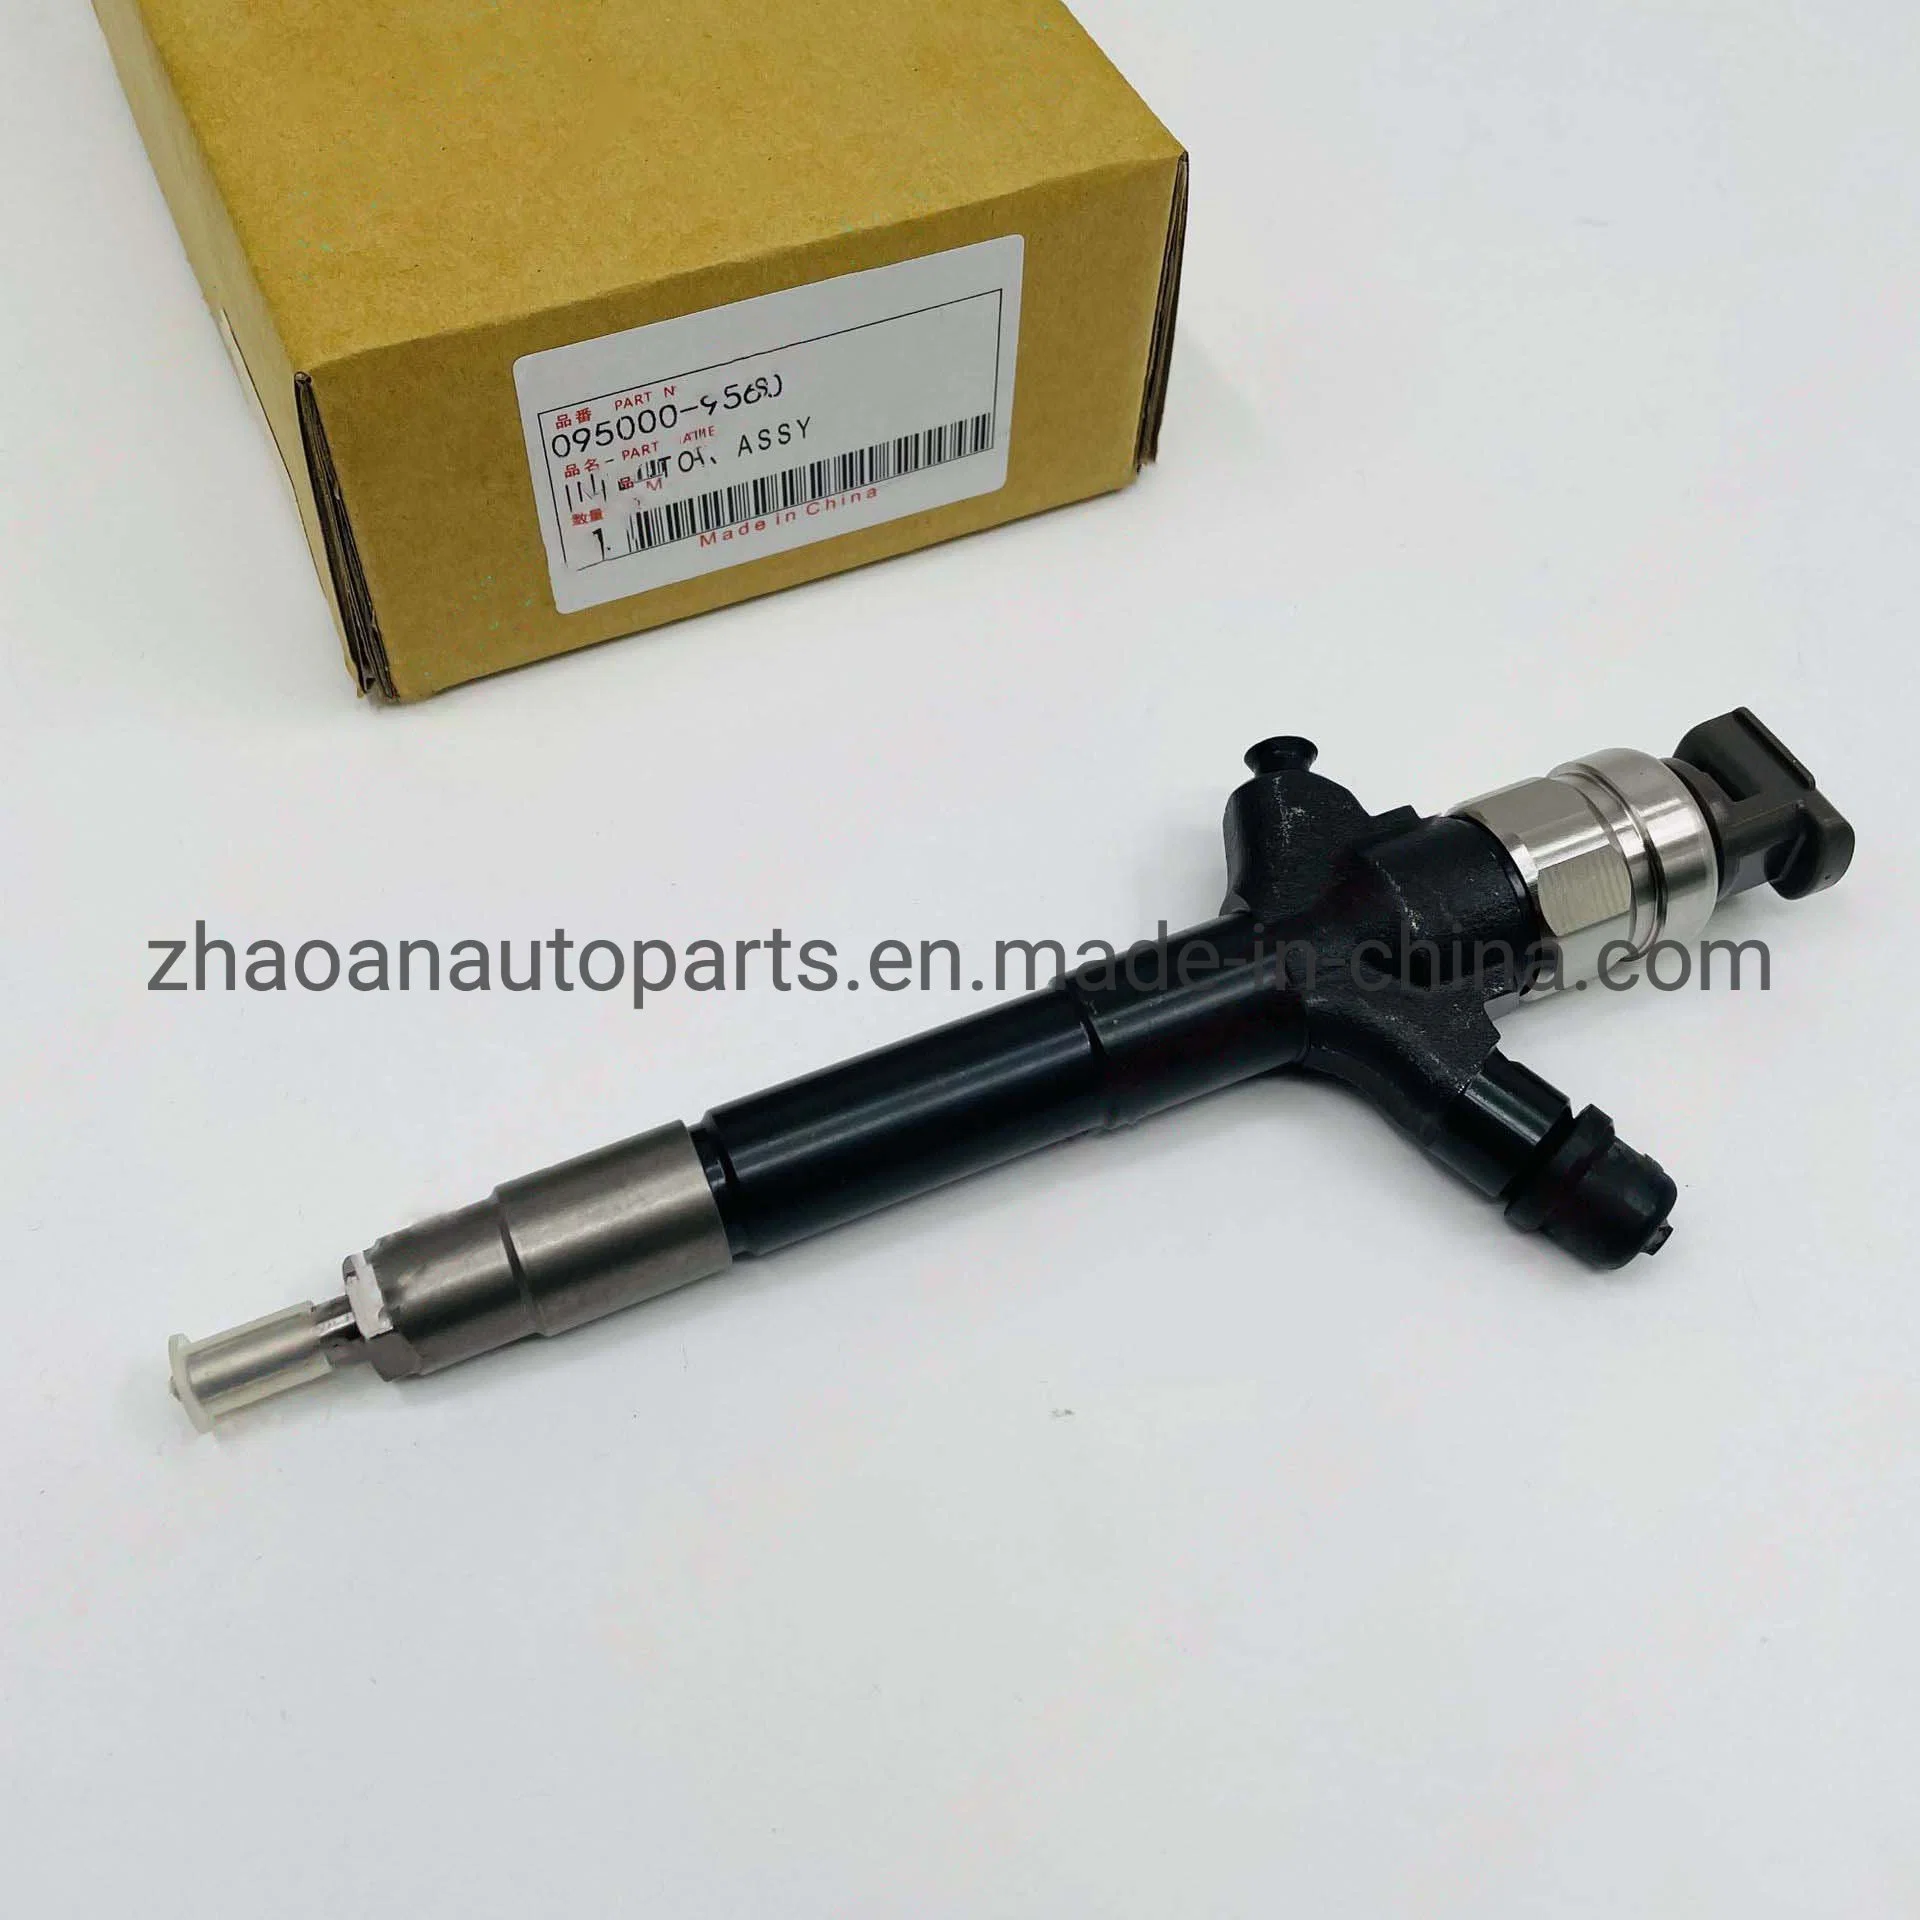 Diesel Common Rail Fuel Injector Denso 095000-9560 1465A257 Is Suitable for Mitsubishi Engine